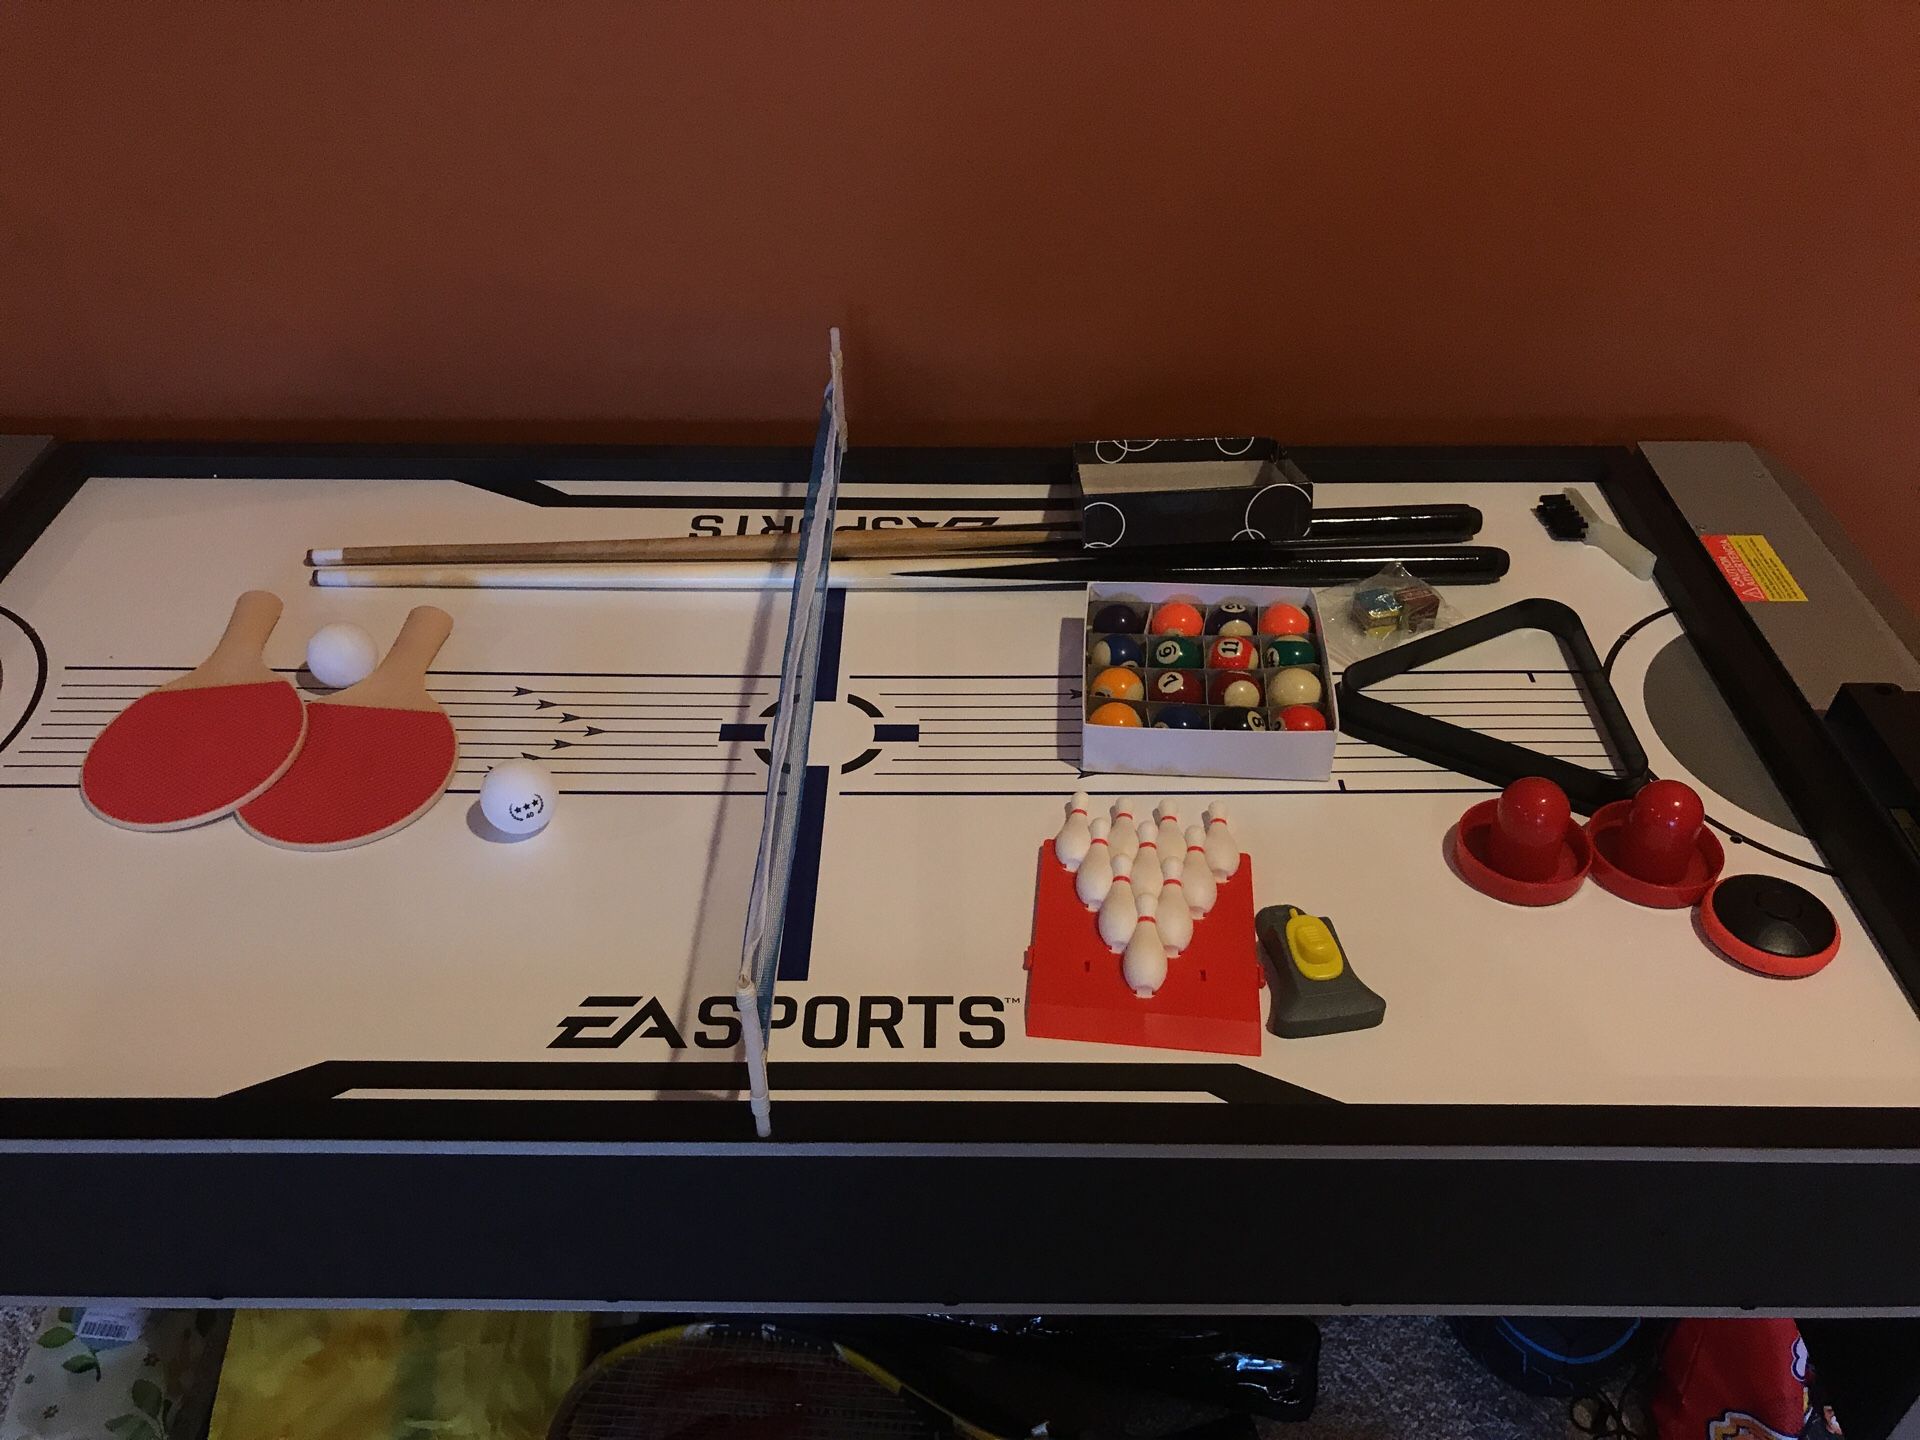 Multi game table